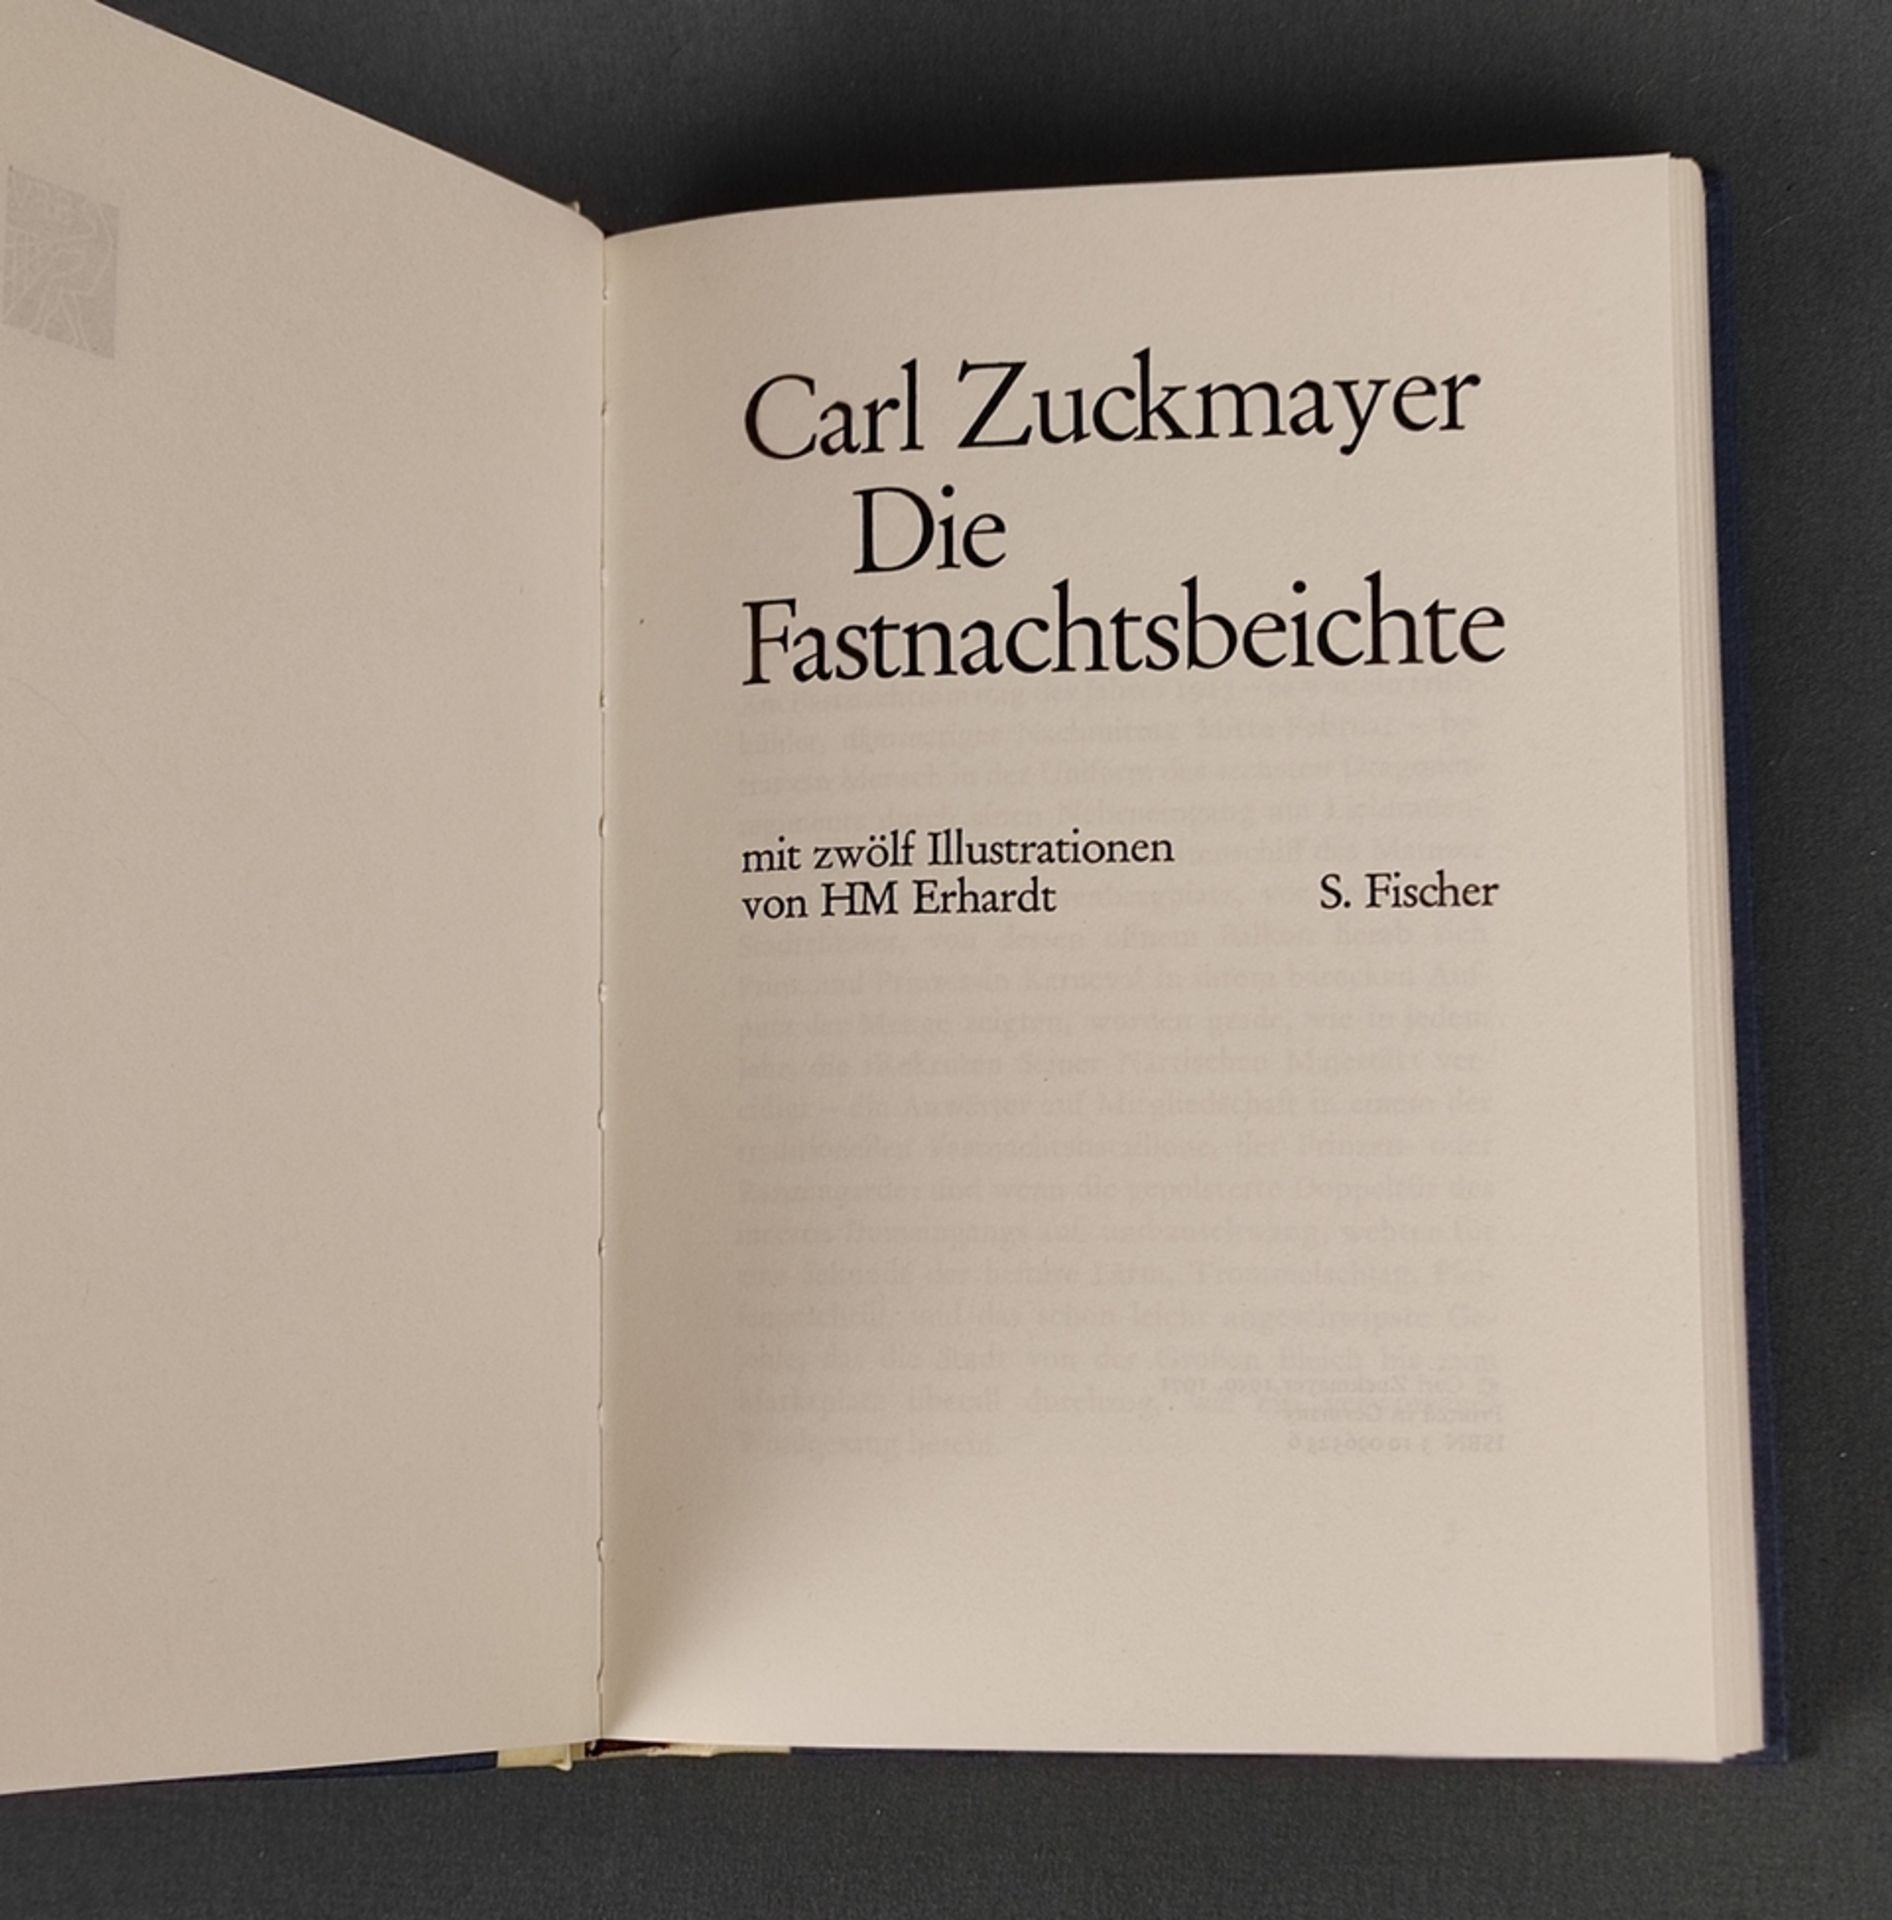 Zuckmayer, Carl "Die Fasnachtsbeichte", Ex. 159/200, signed by hand, 1971, 256 pages, 12 illustrati - Image 4 of 5